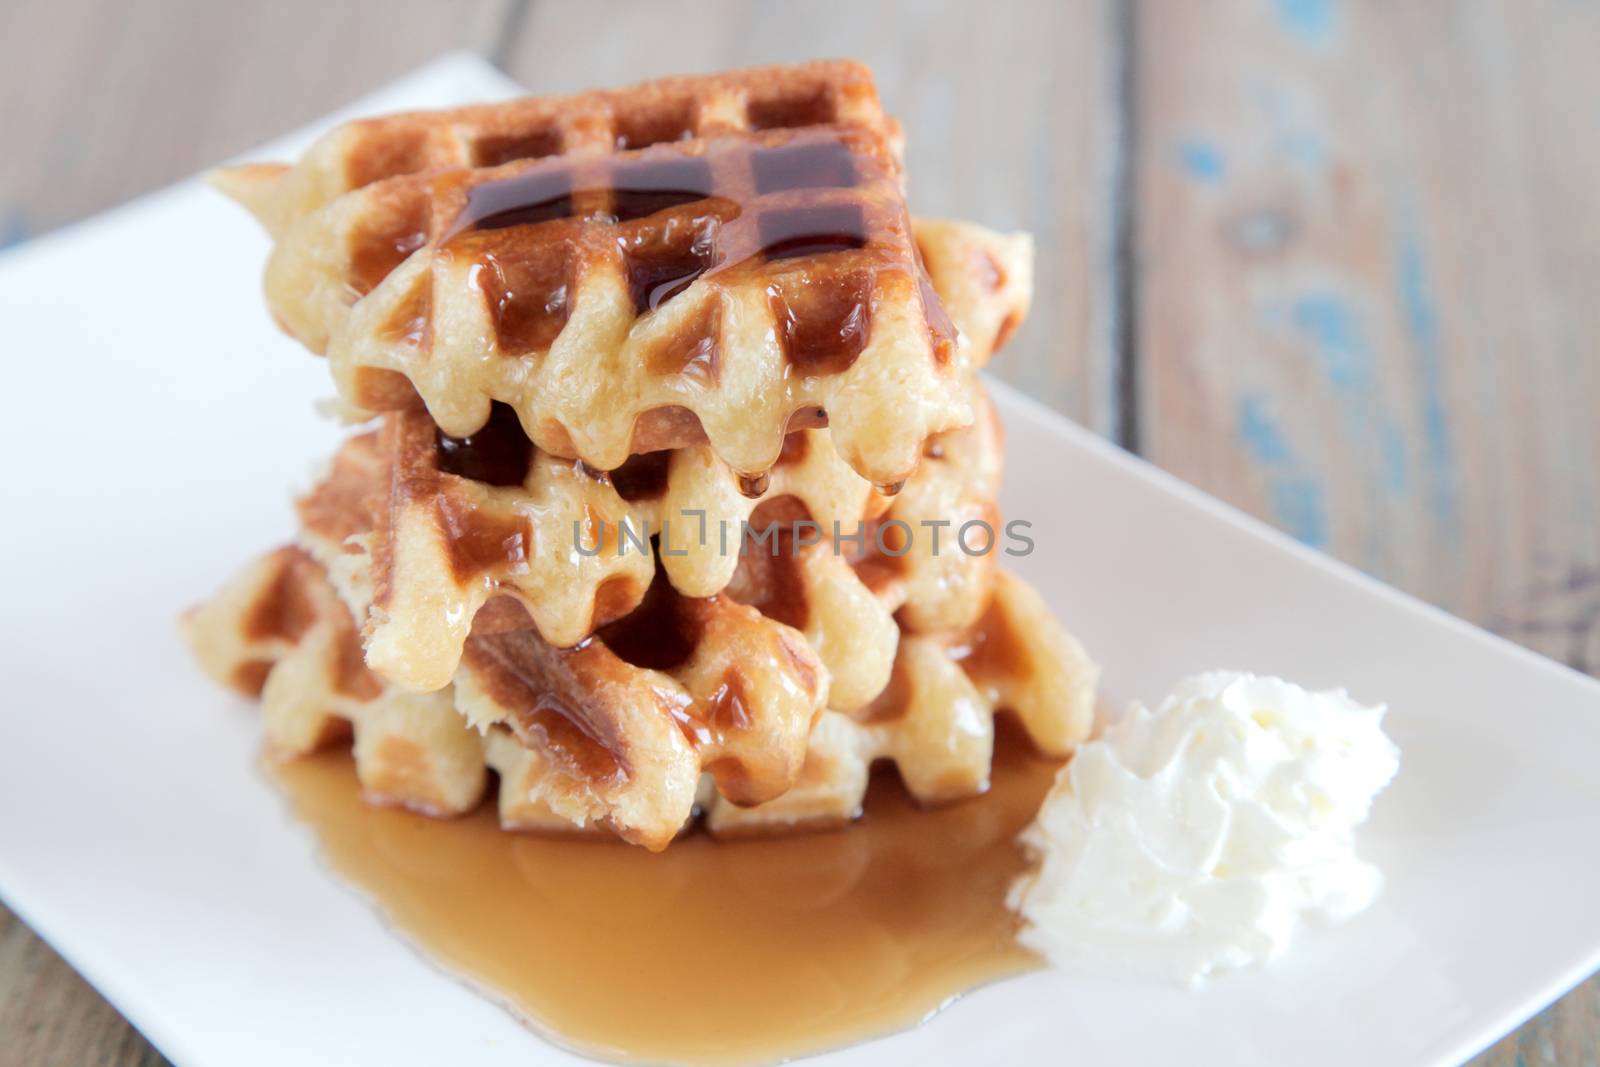 Maple syrup waffle with whipped vanilla ice cream by haiderazim